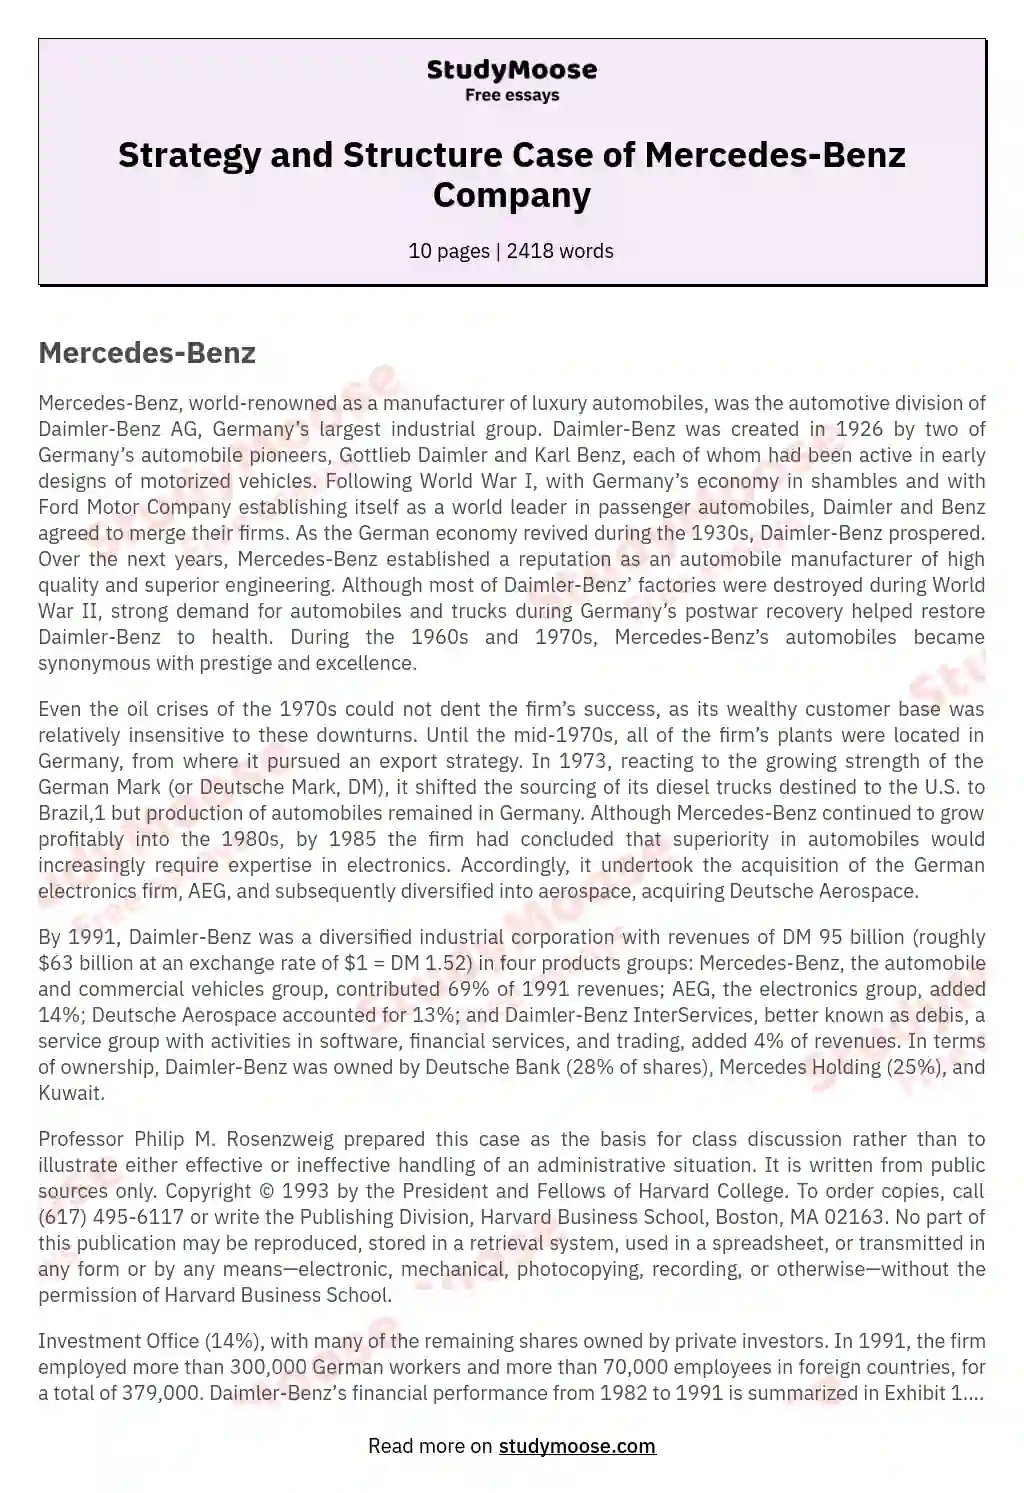 Strategy and Structure Case of Mercedes-Benz Company essay